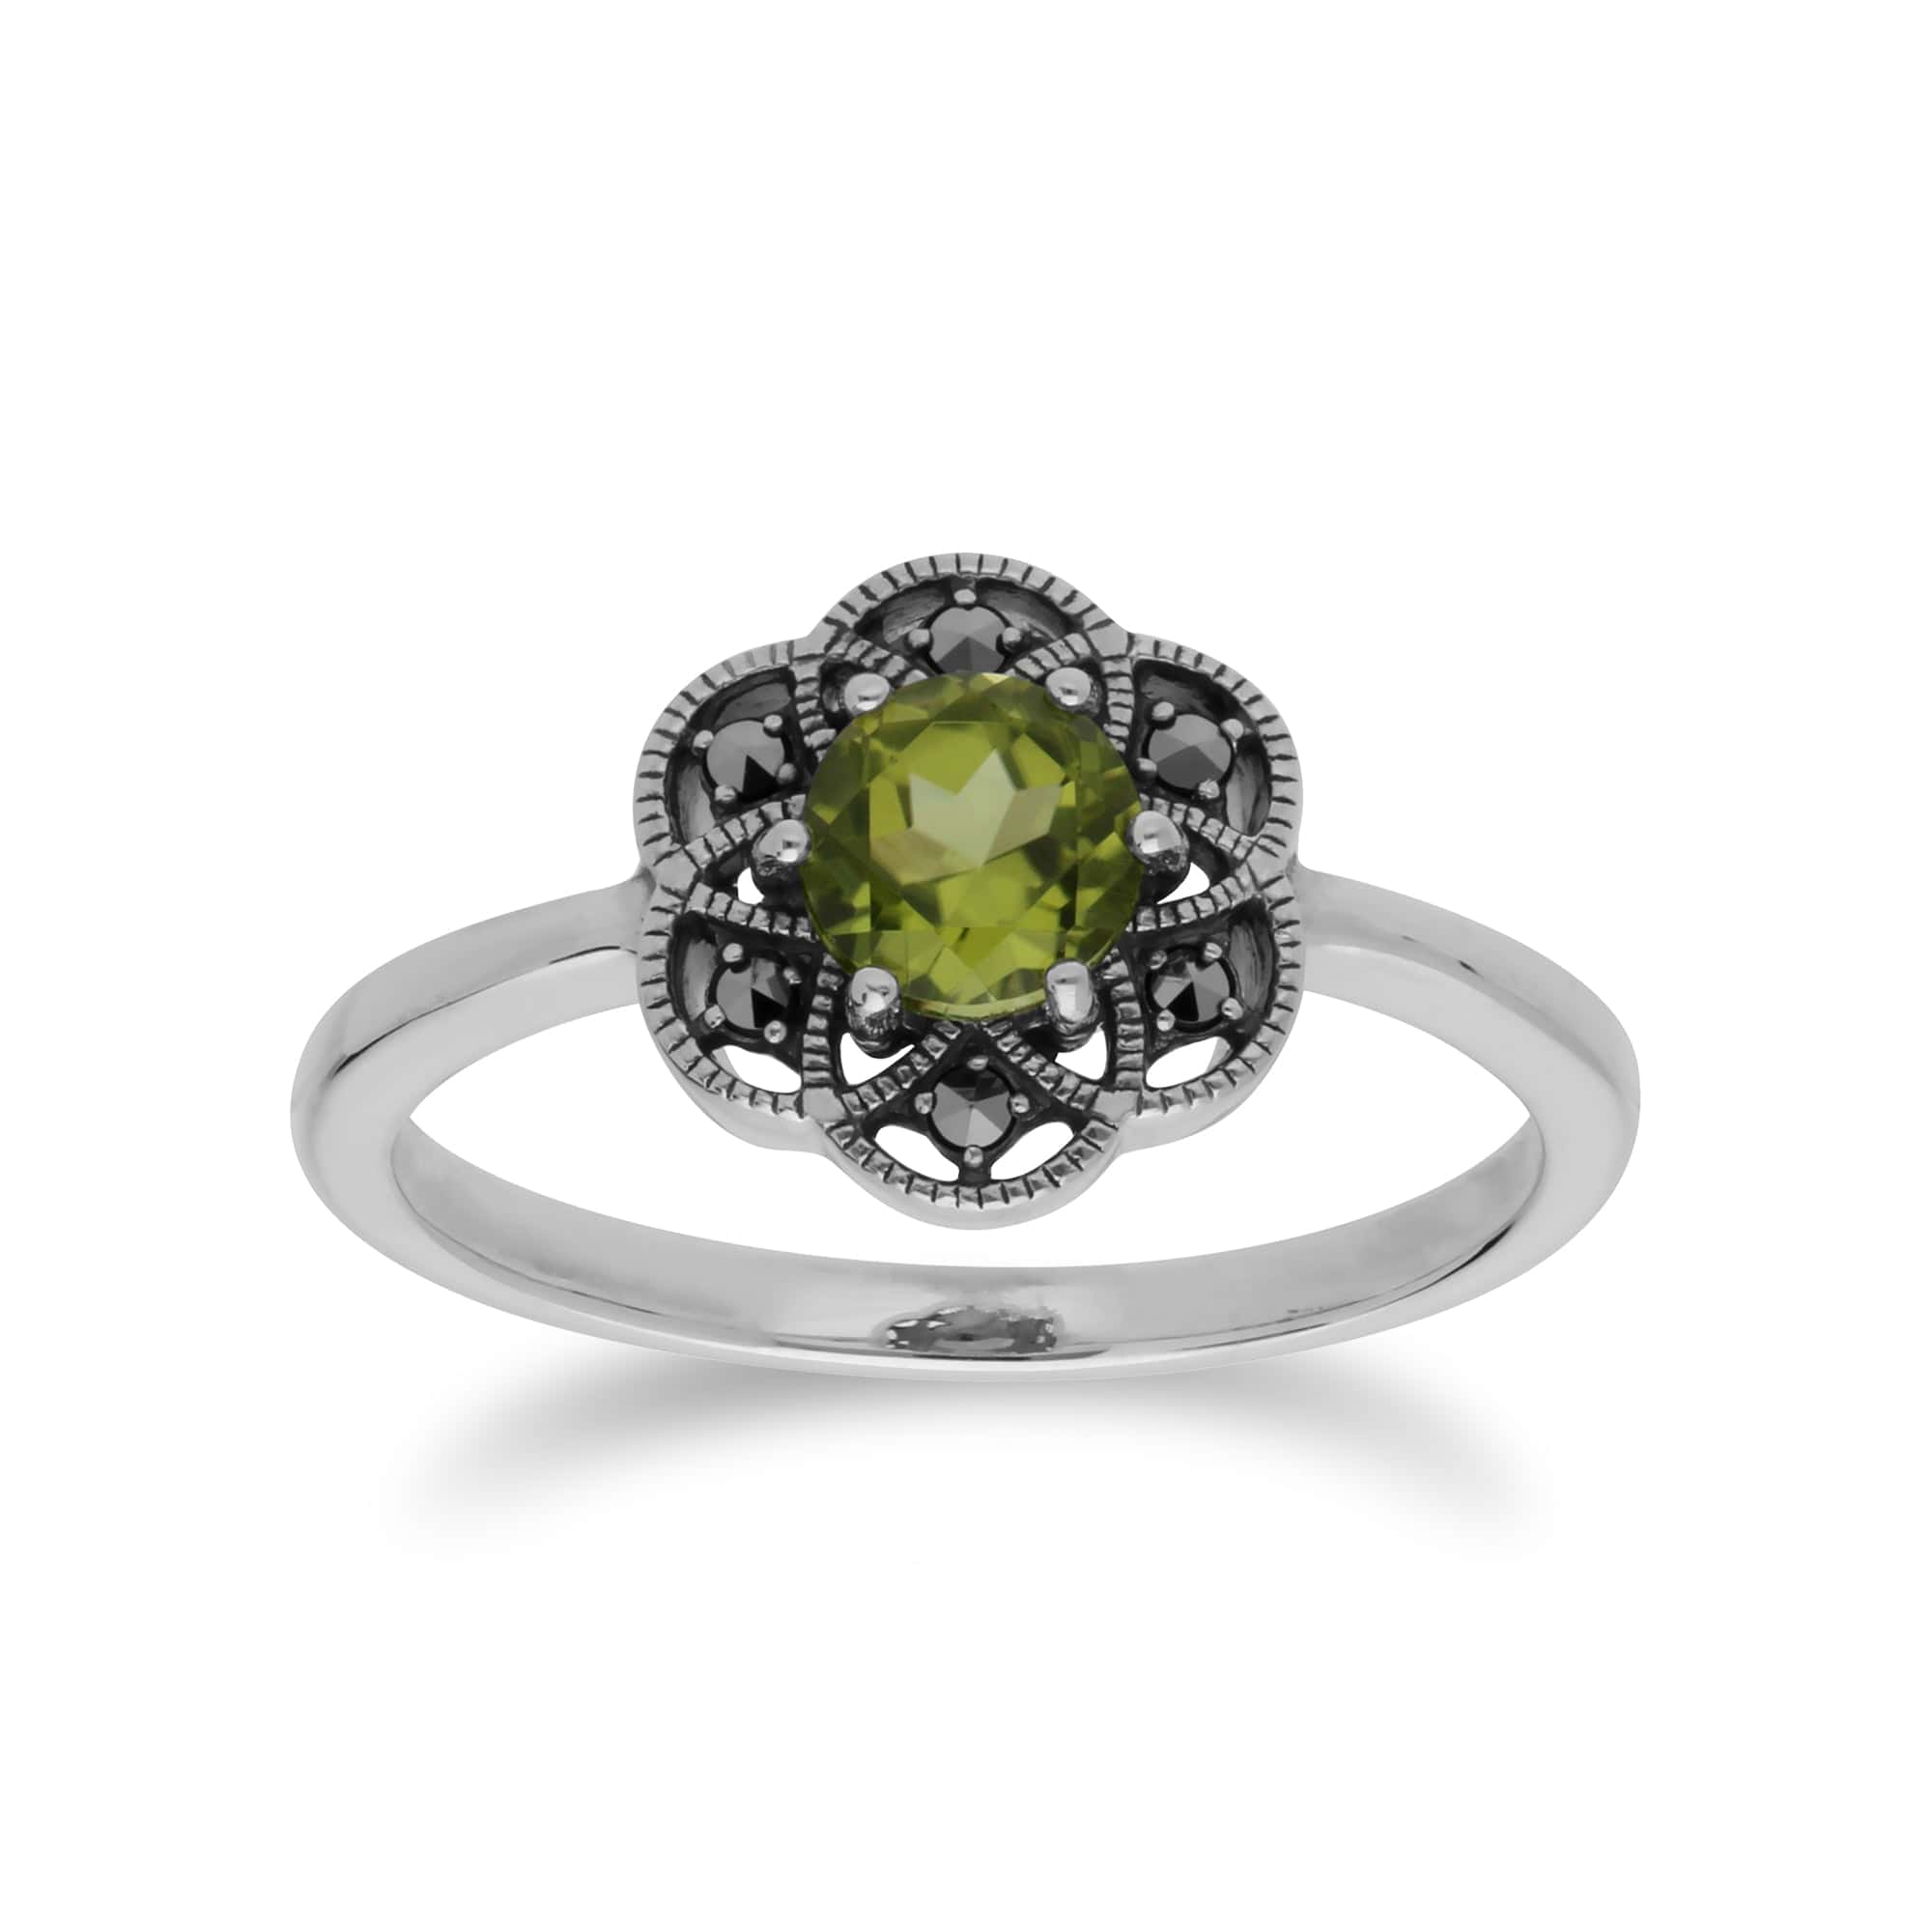 214R599404925 Floral Round Peridot & Marcasite Daisy Ring in 925 Sterling Silver 1